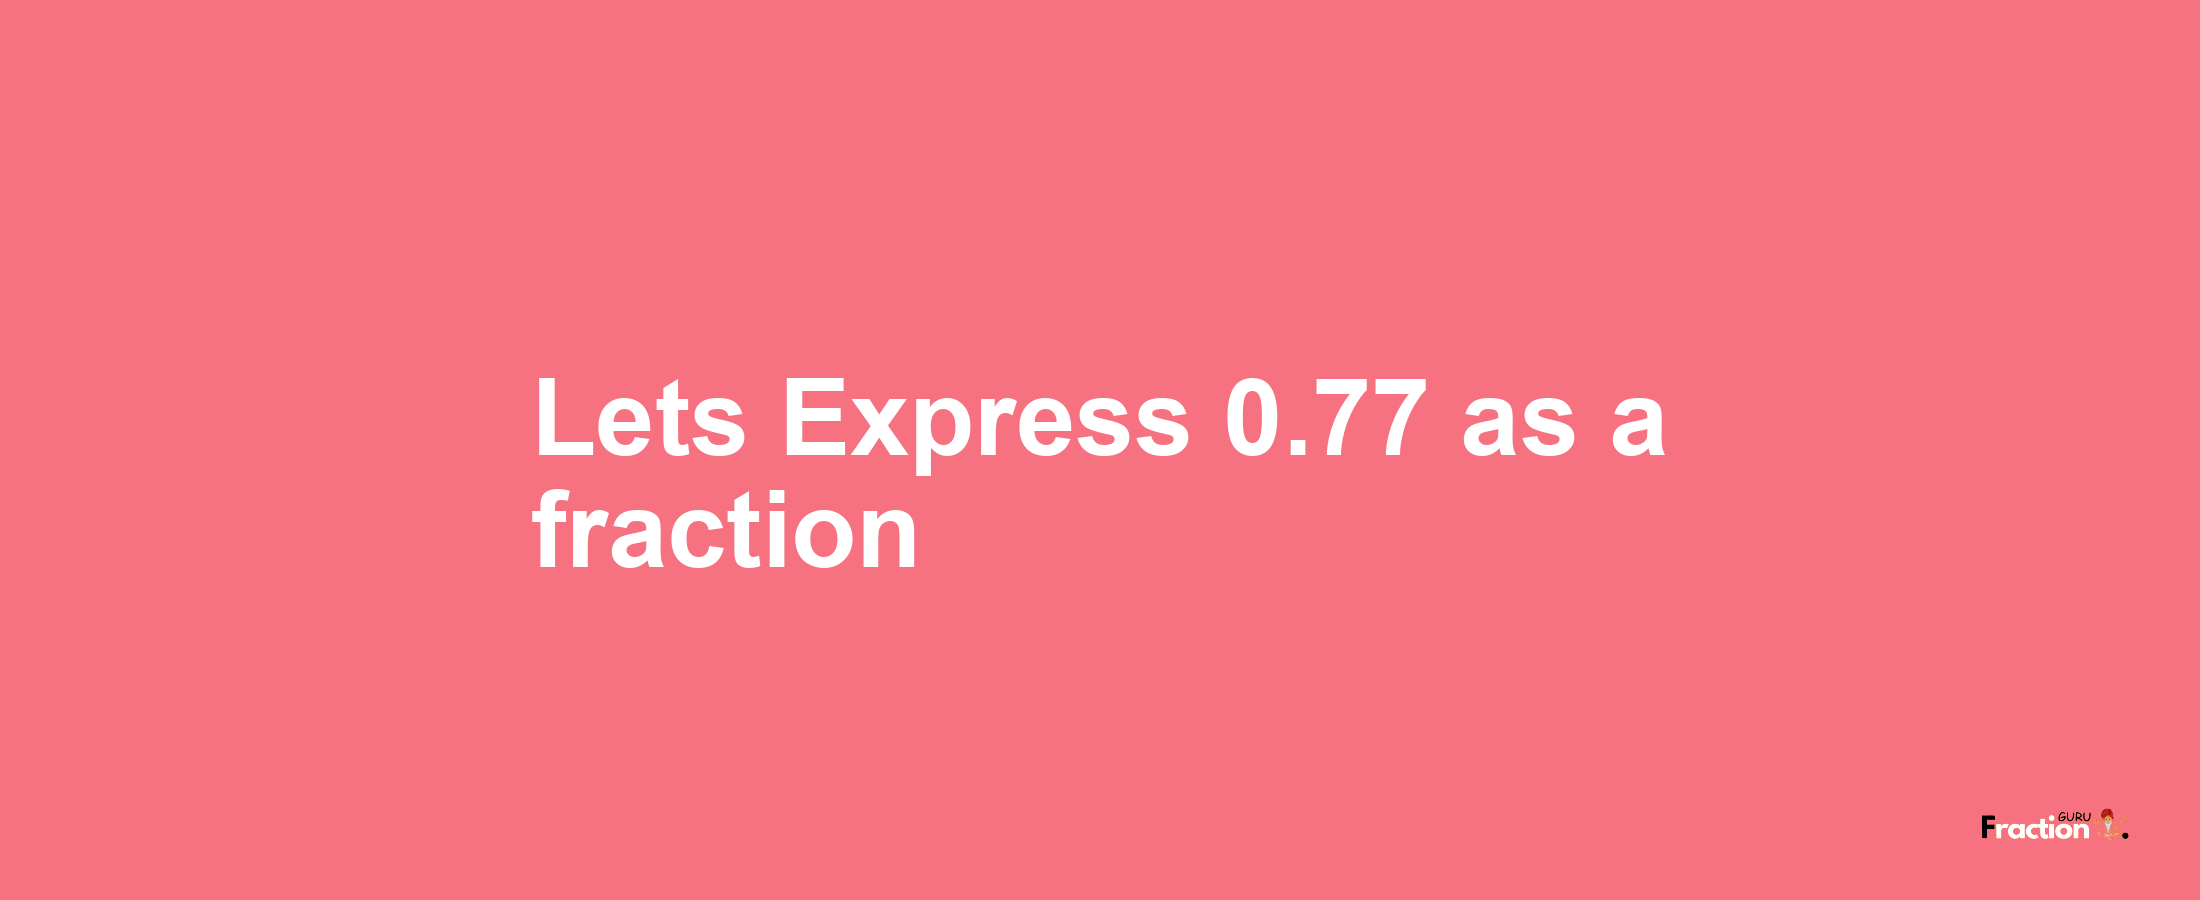 Lets Express 0.77 as afraction